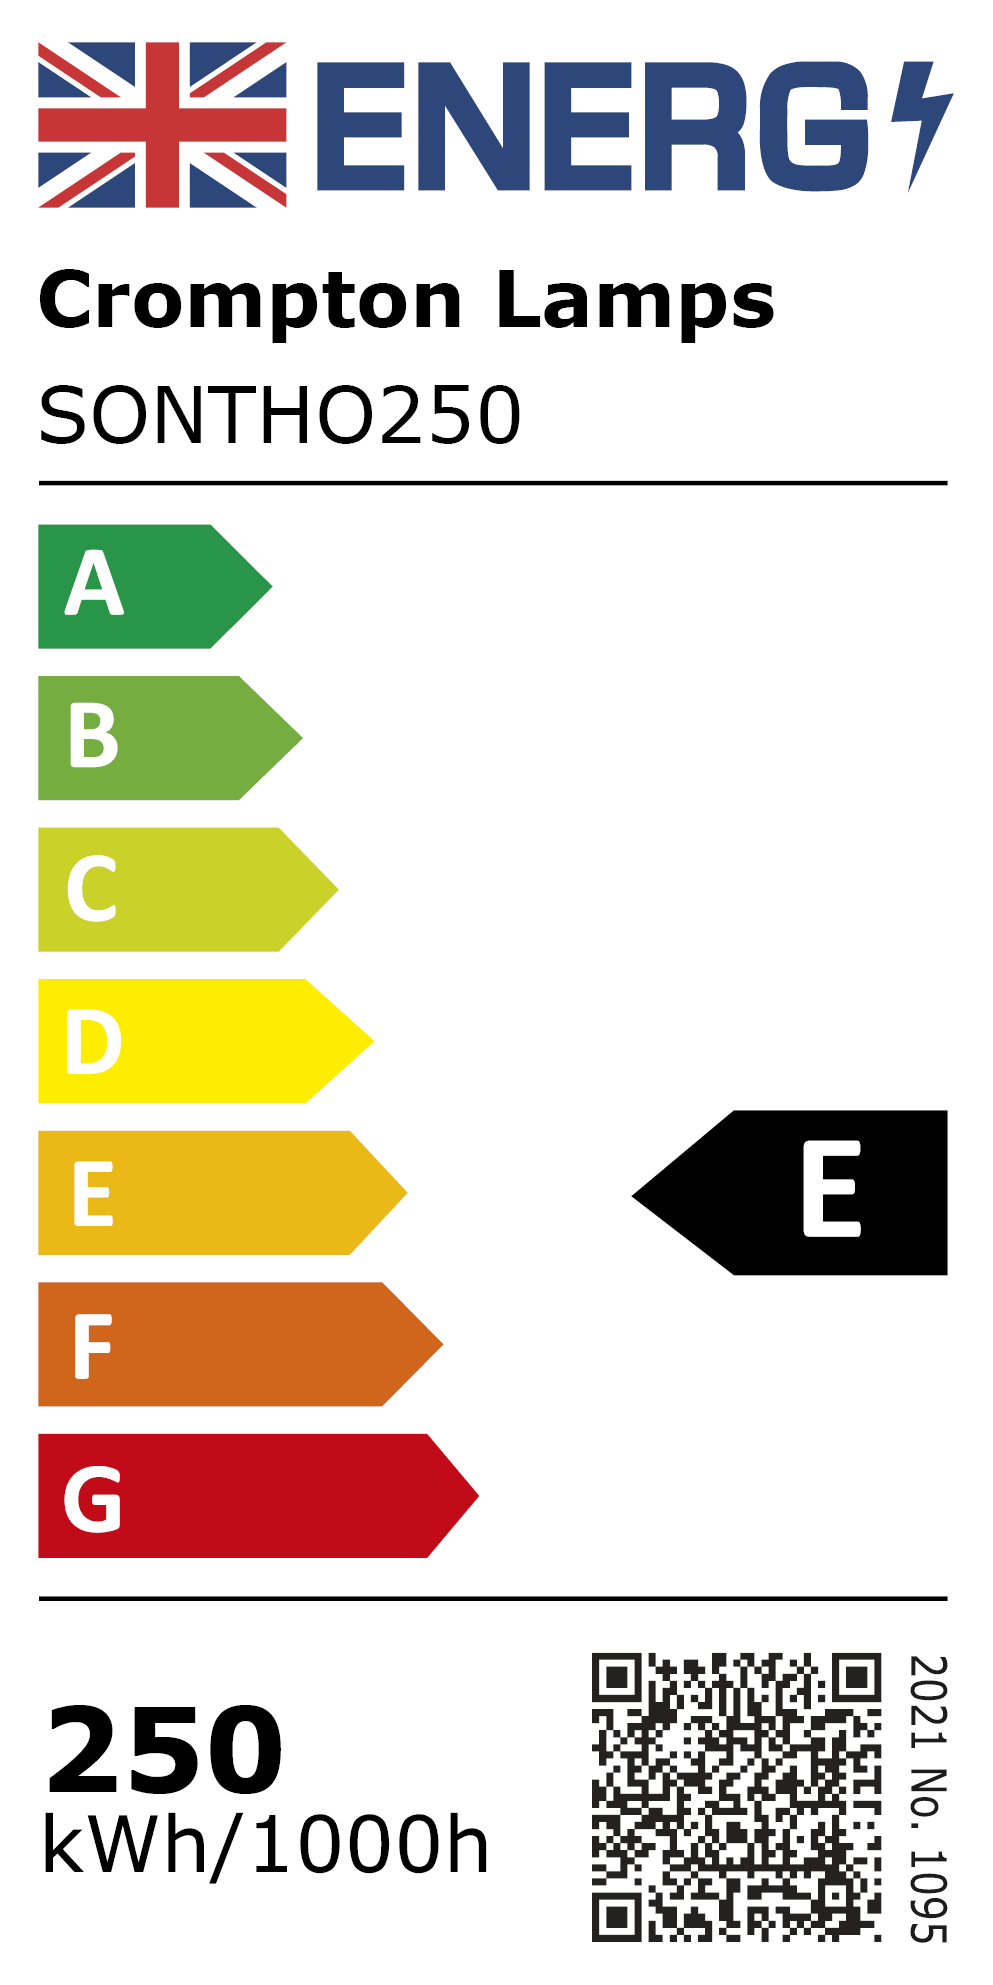 New 2021 Energy Rating Label: Stock Code SONTHO250